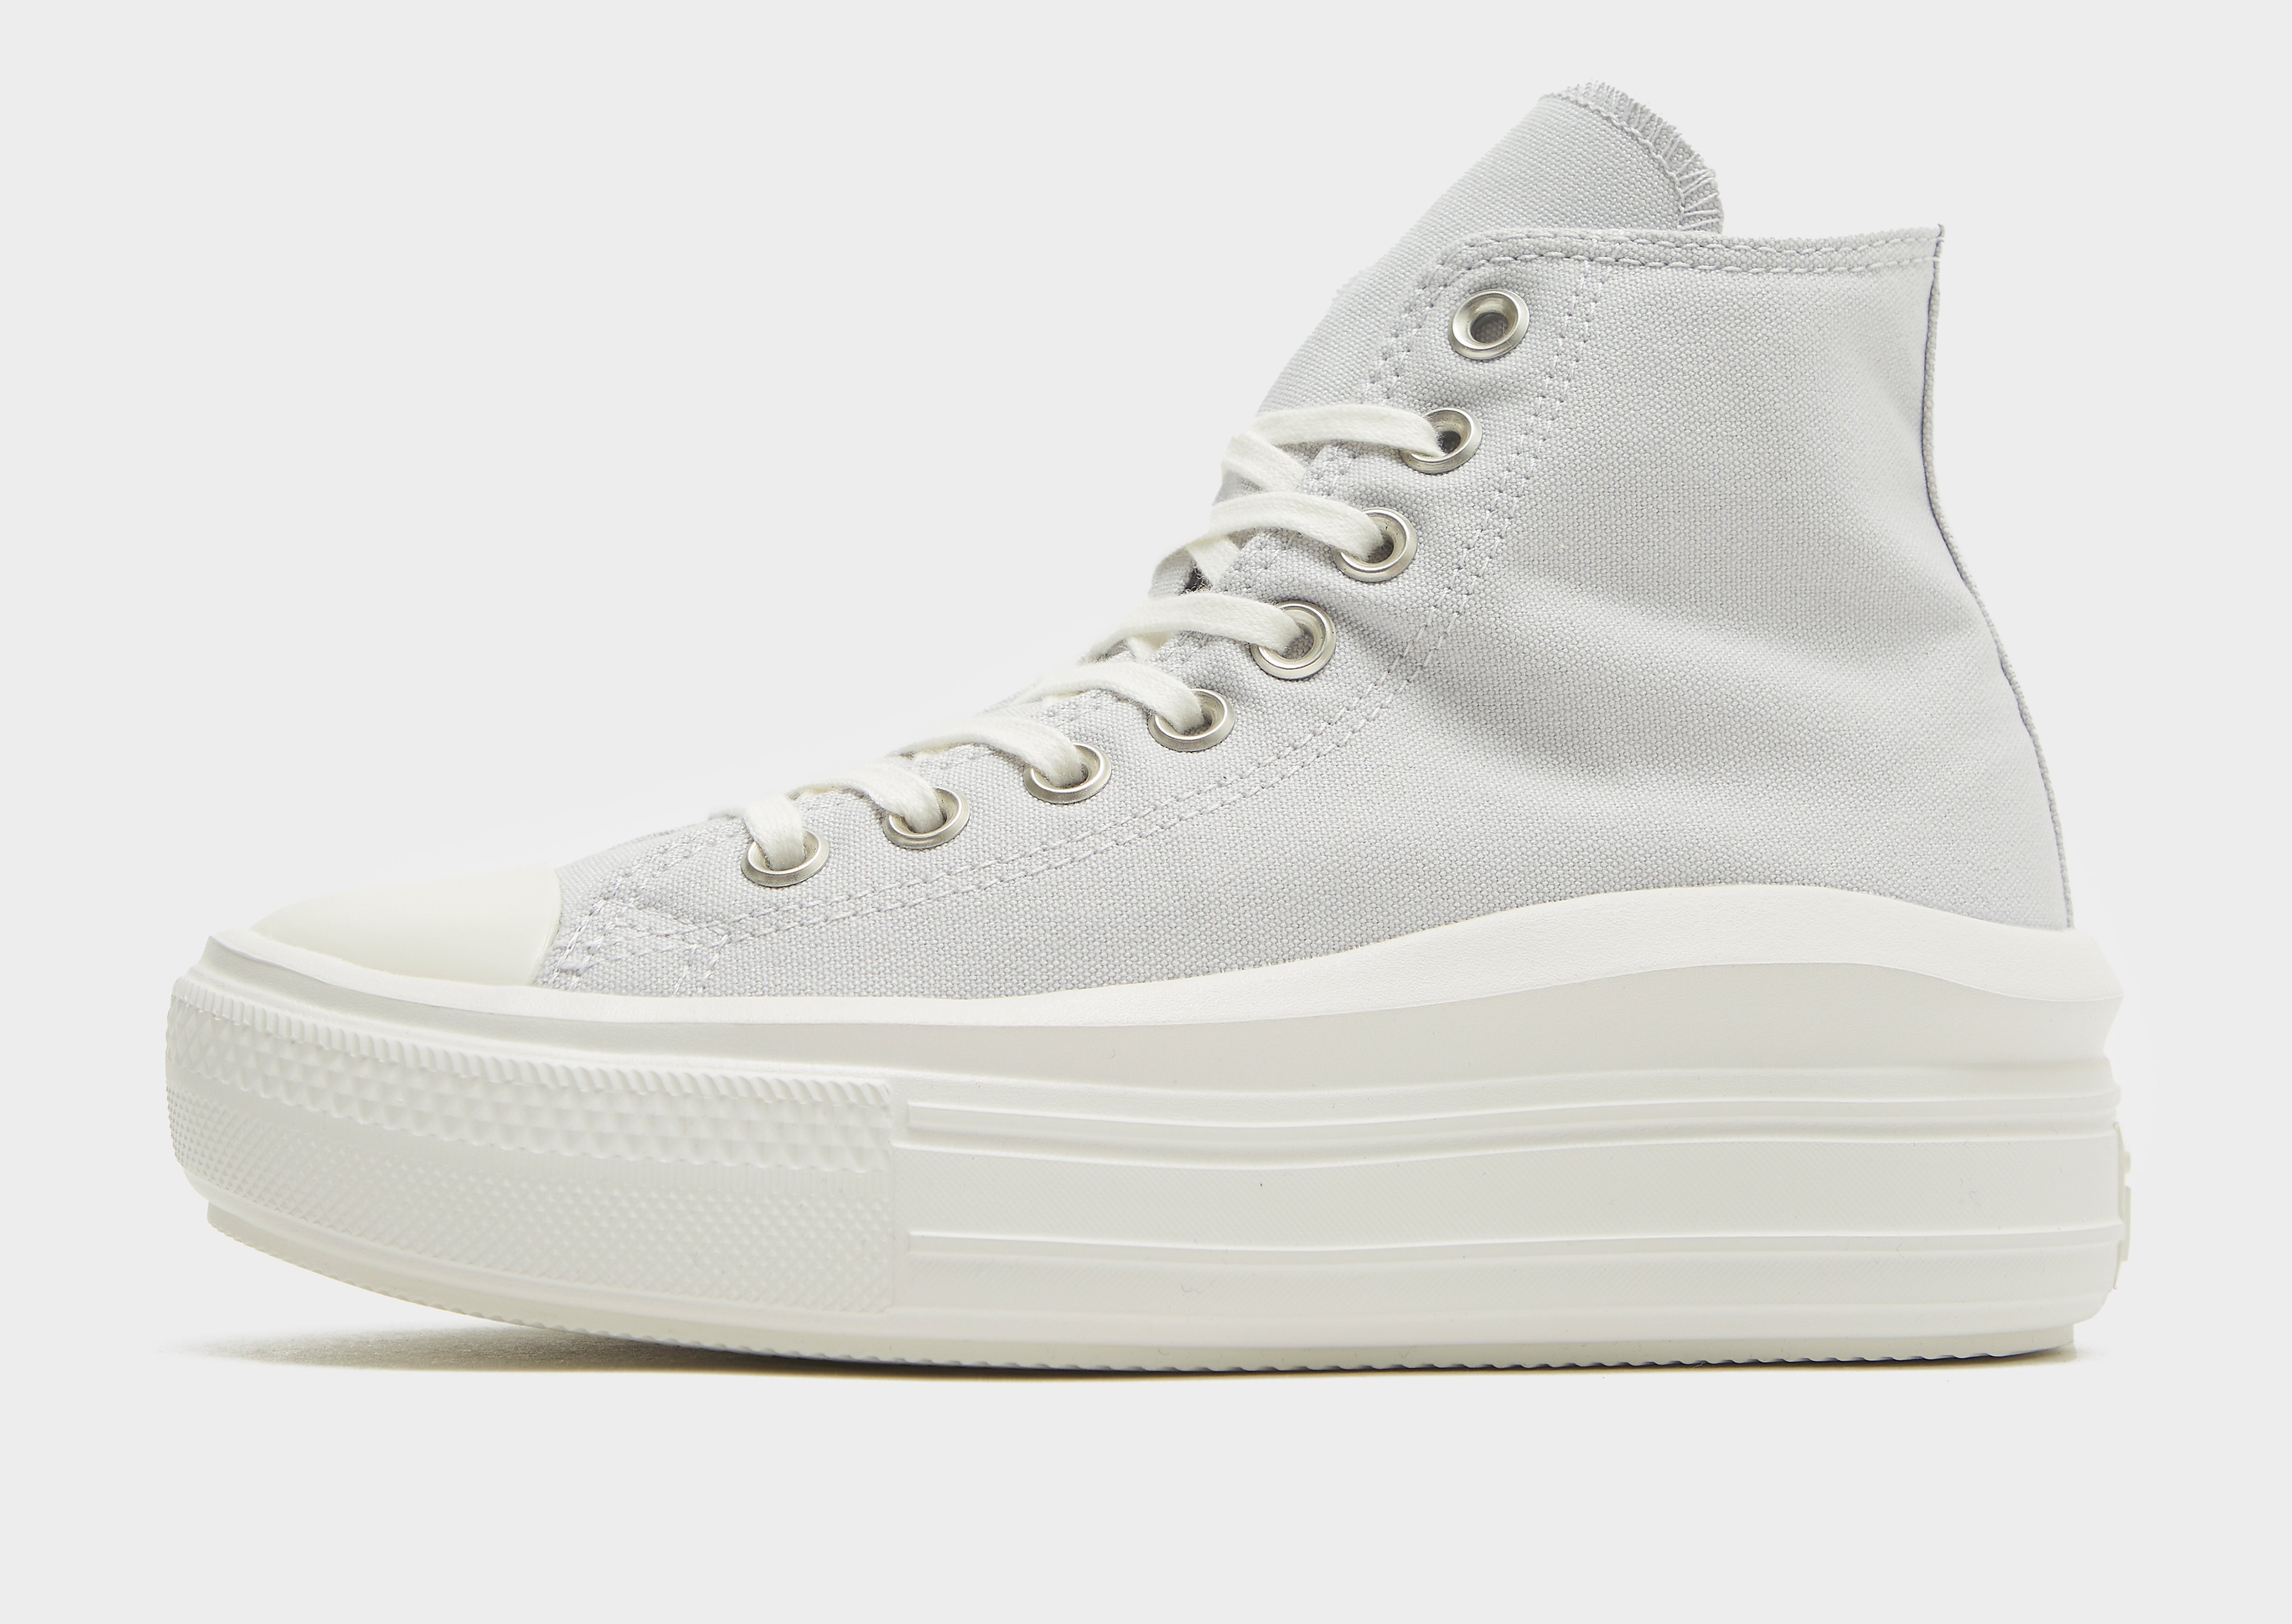 Converse Chuck Taylor All Star Move High Women's - Only at JD - Grey, Grey